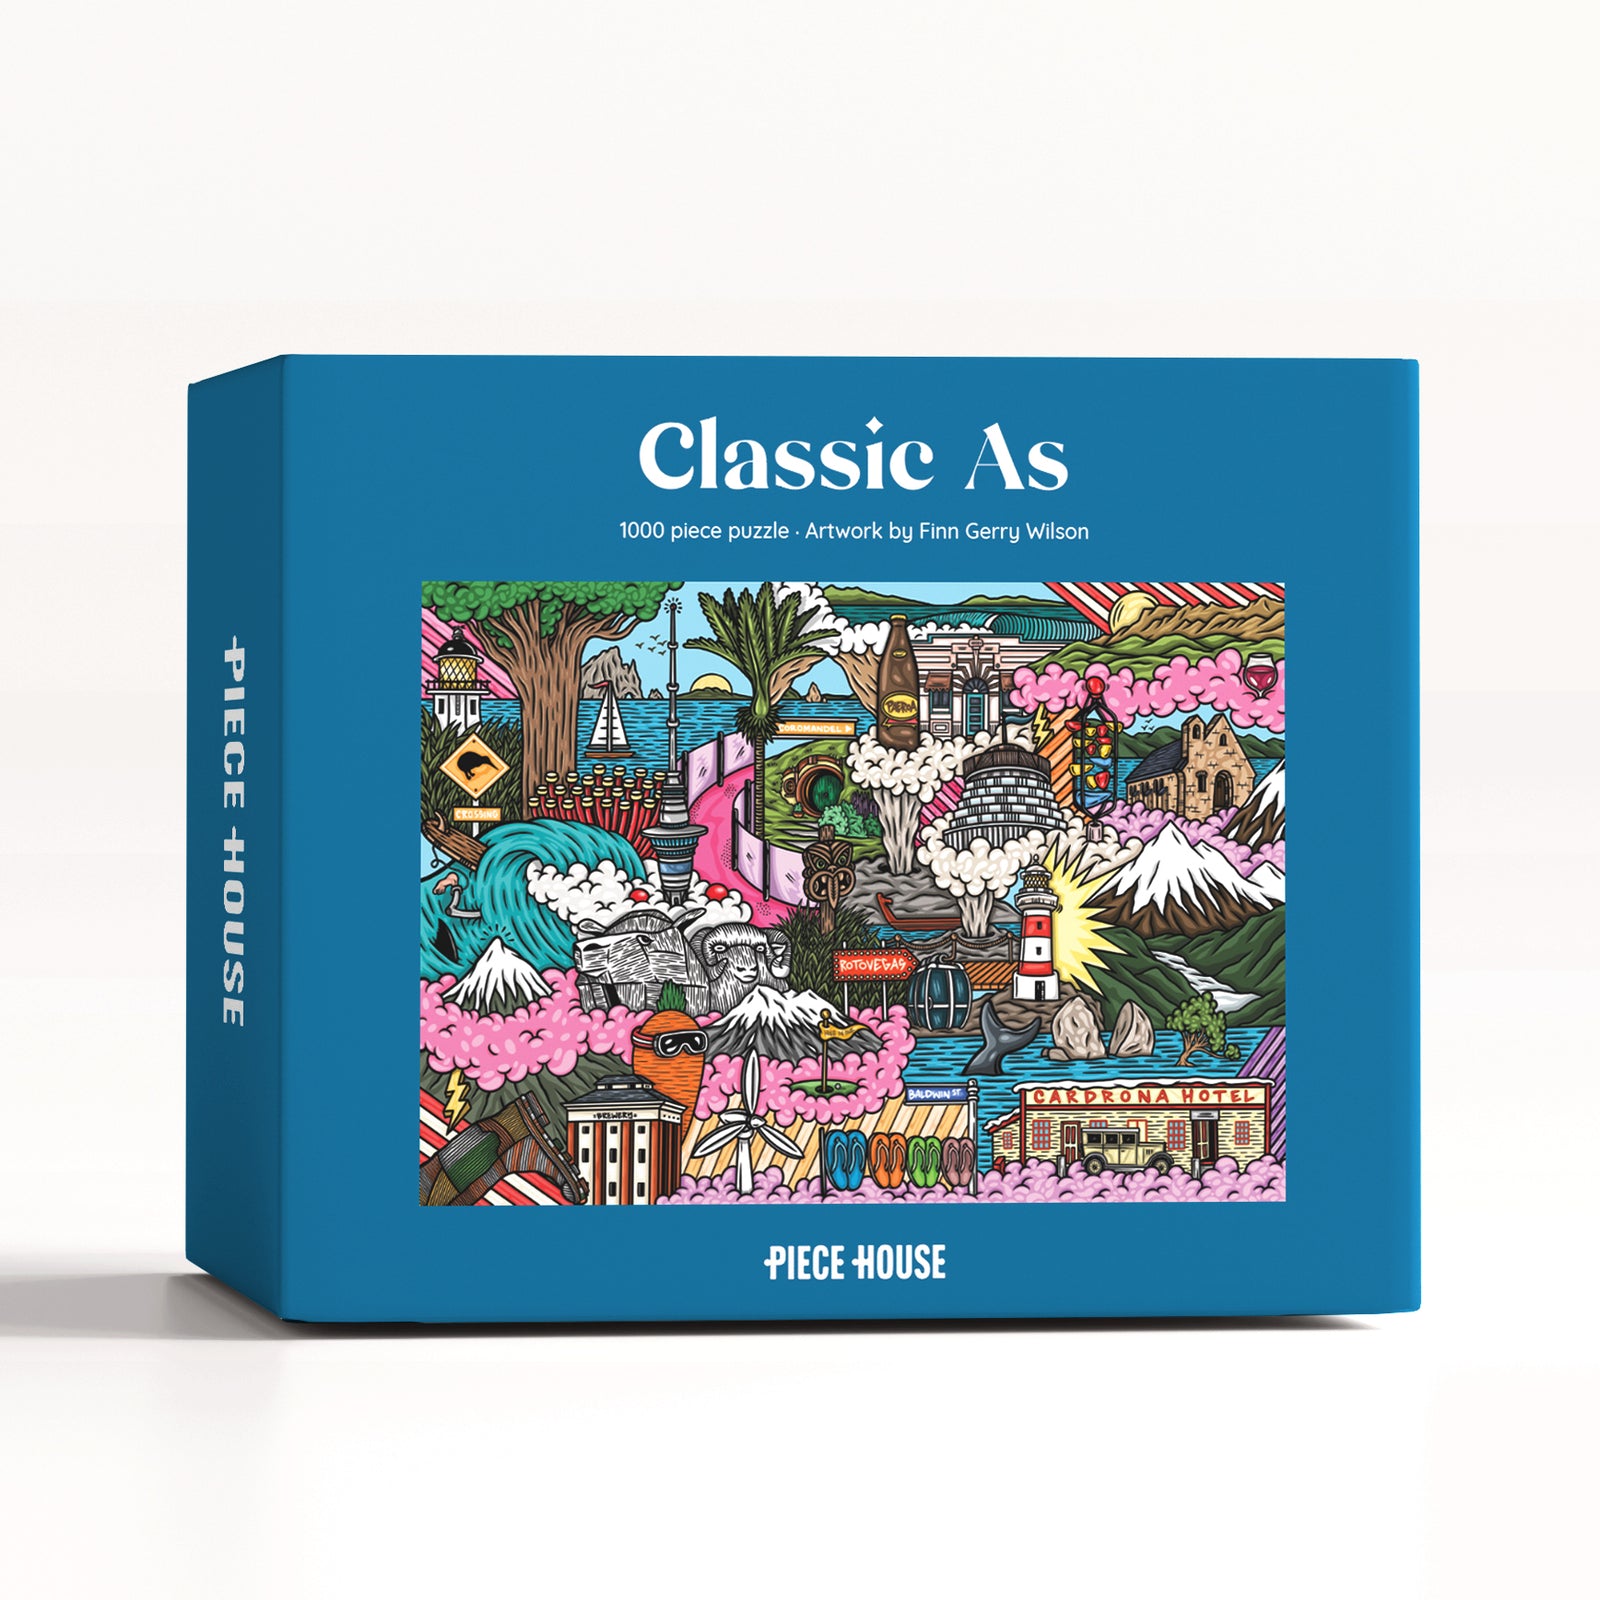 PieceHouse-Puzzle-Box-Classic-As